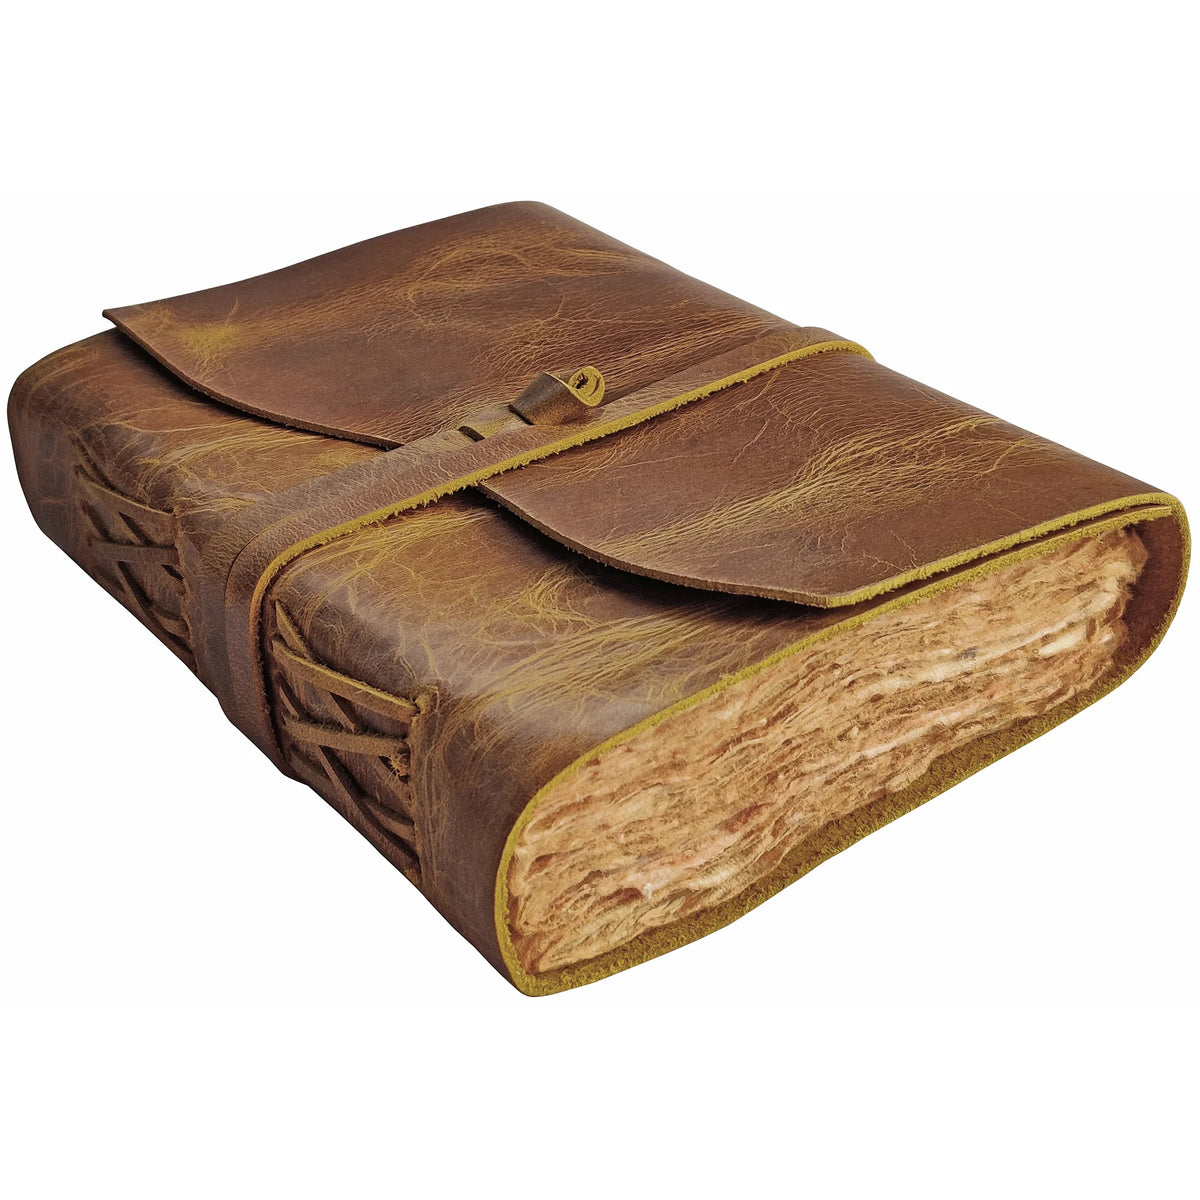 LEATHER HERITAGE Antique Key Leather Bound journal with deckle